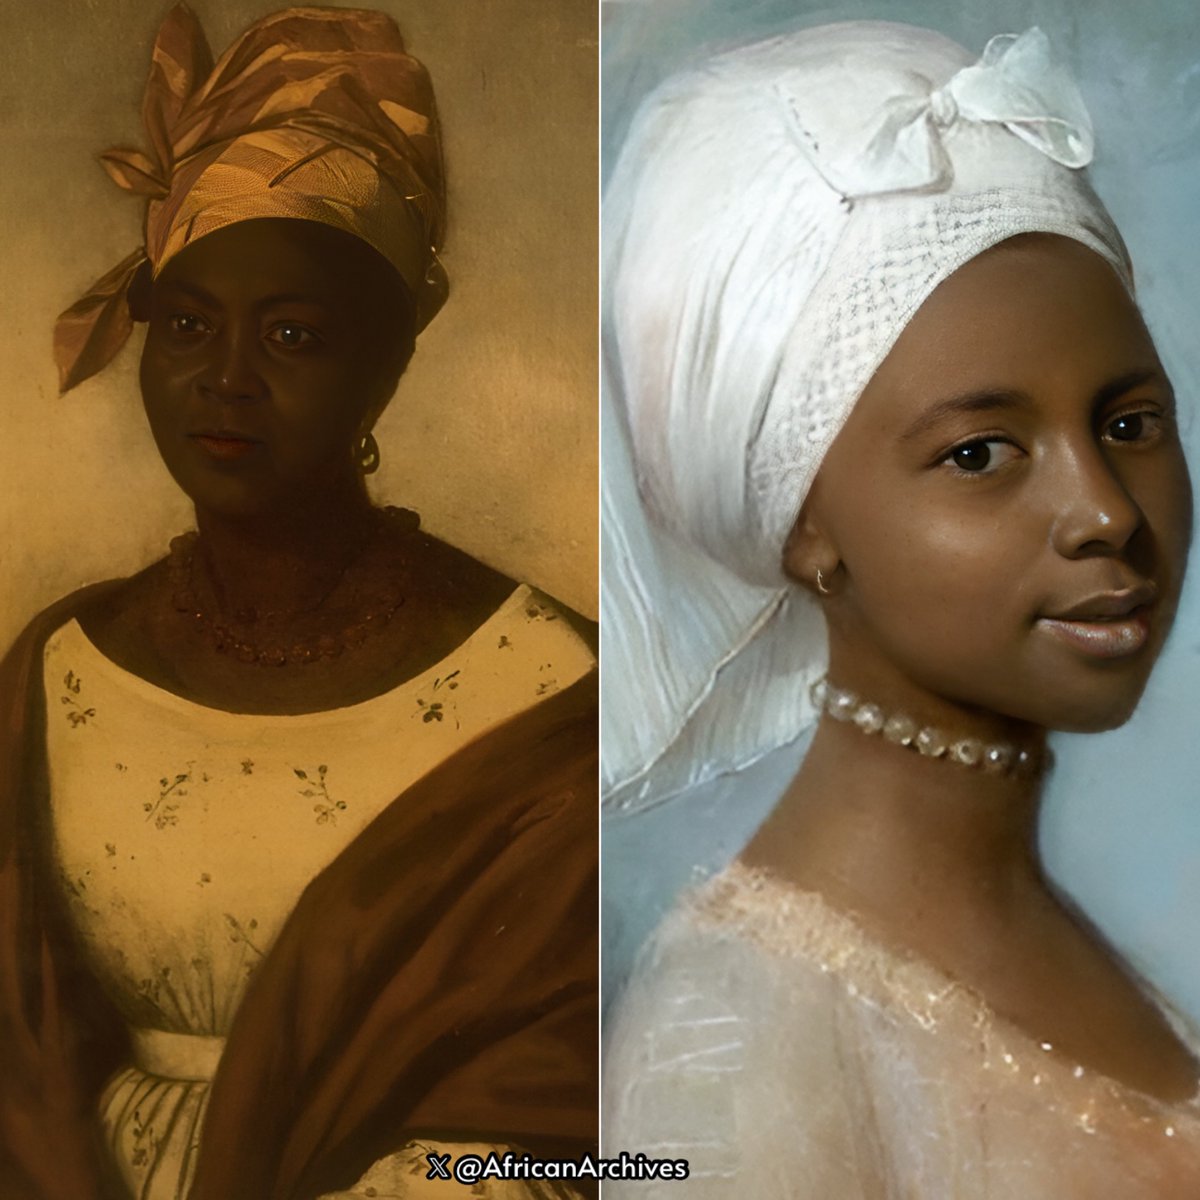 The Tignon laws of the 18th century were laws that banned black women from exposing their natural hair in public. Their hairdos was obscuring the status of the white women and this threatened the social stability. The law would control colored women “who dressed too elegantly..”